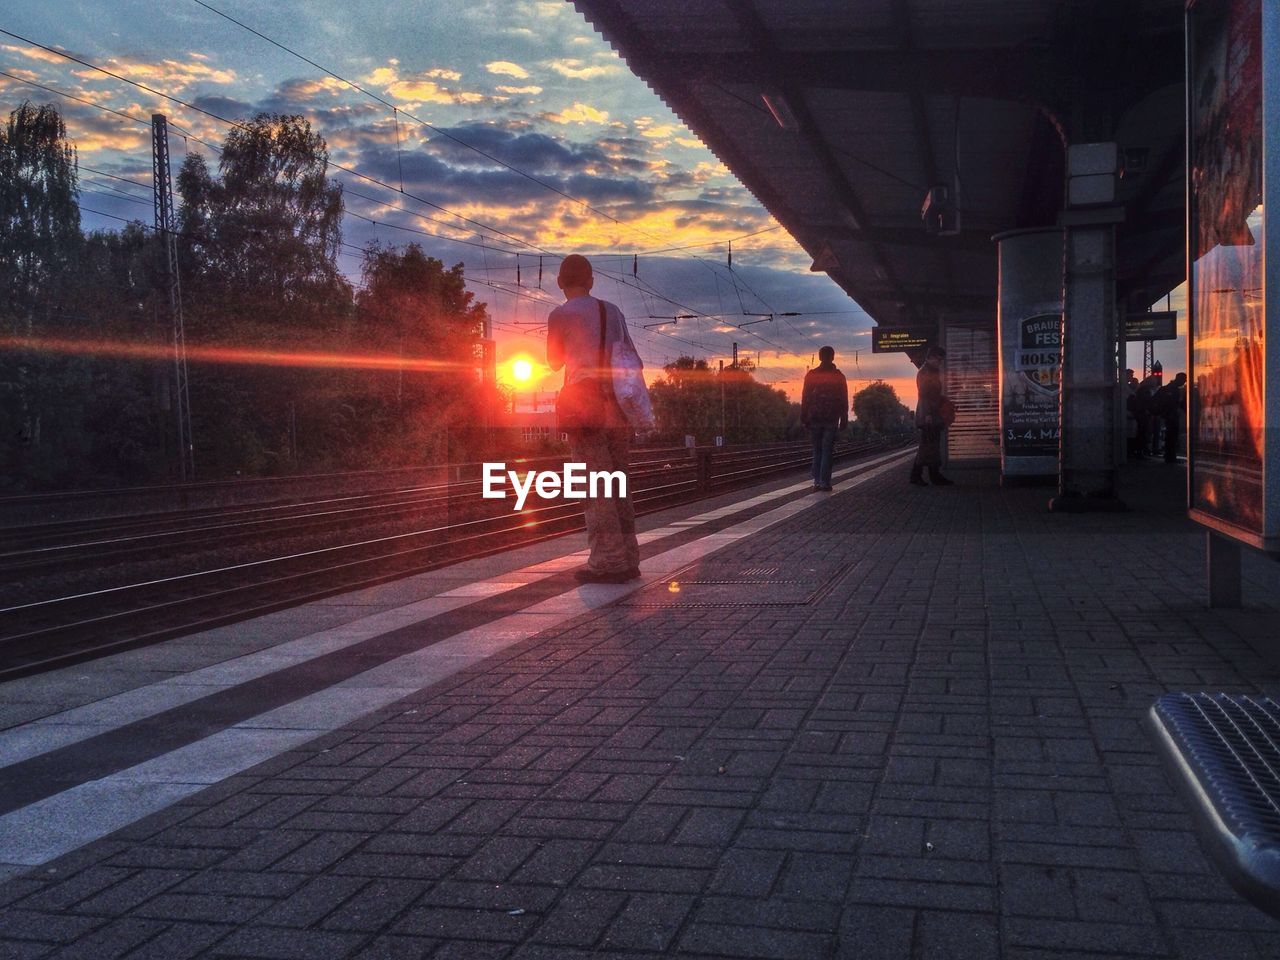 People at railway station during sunset